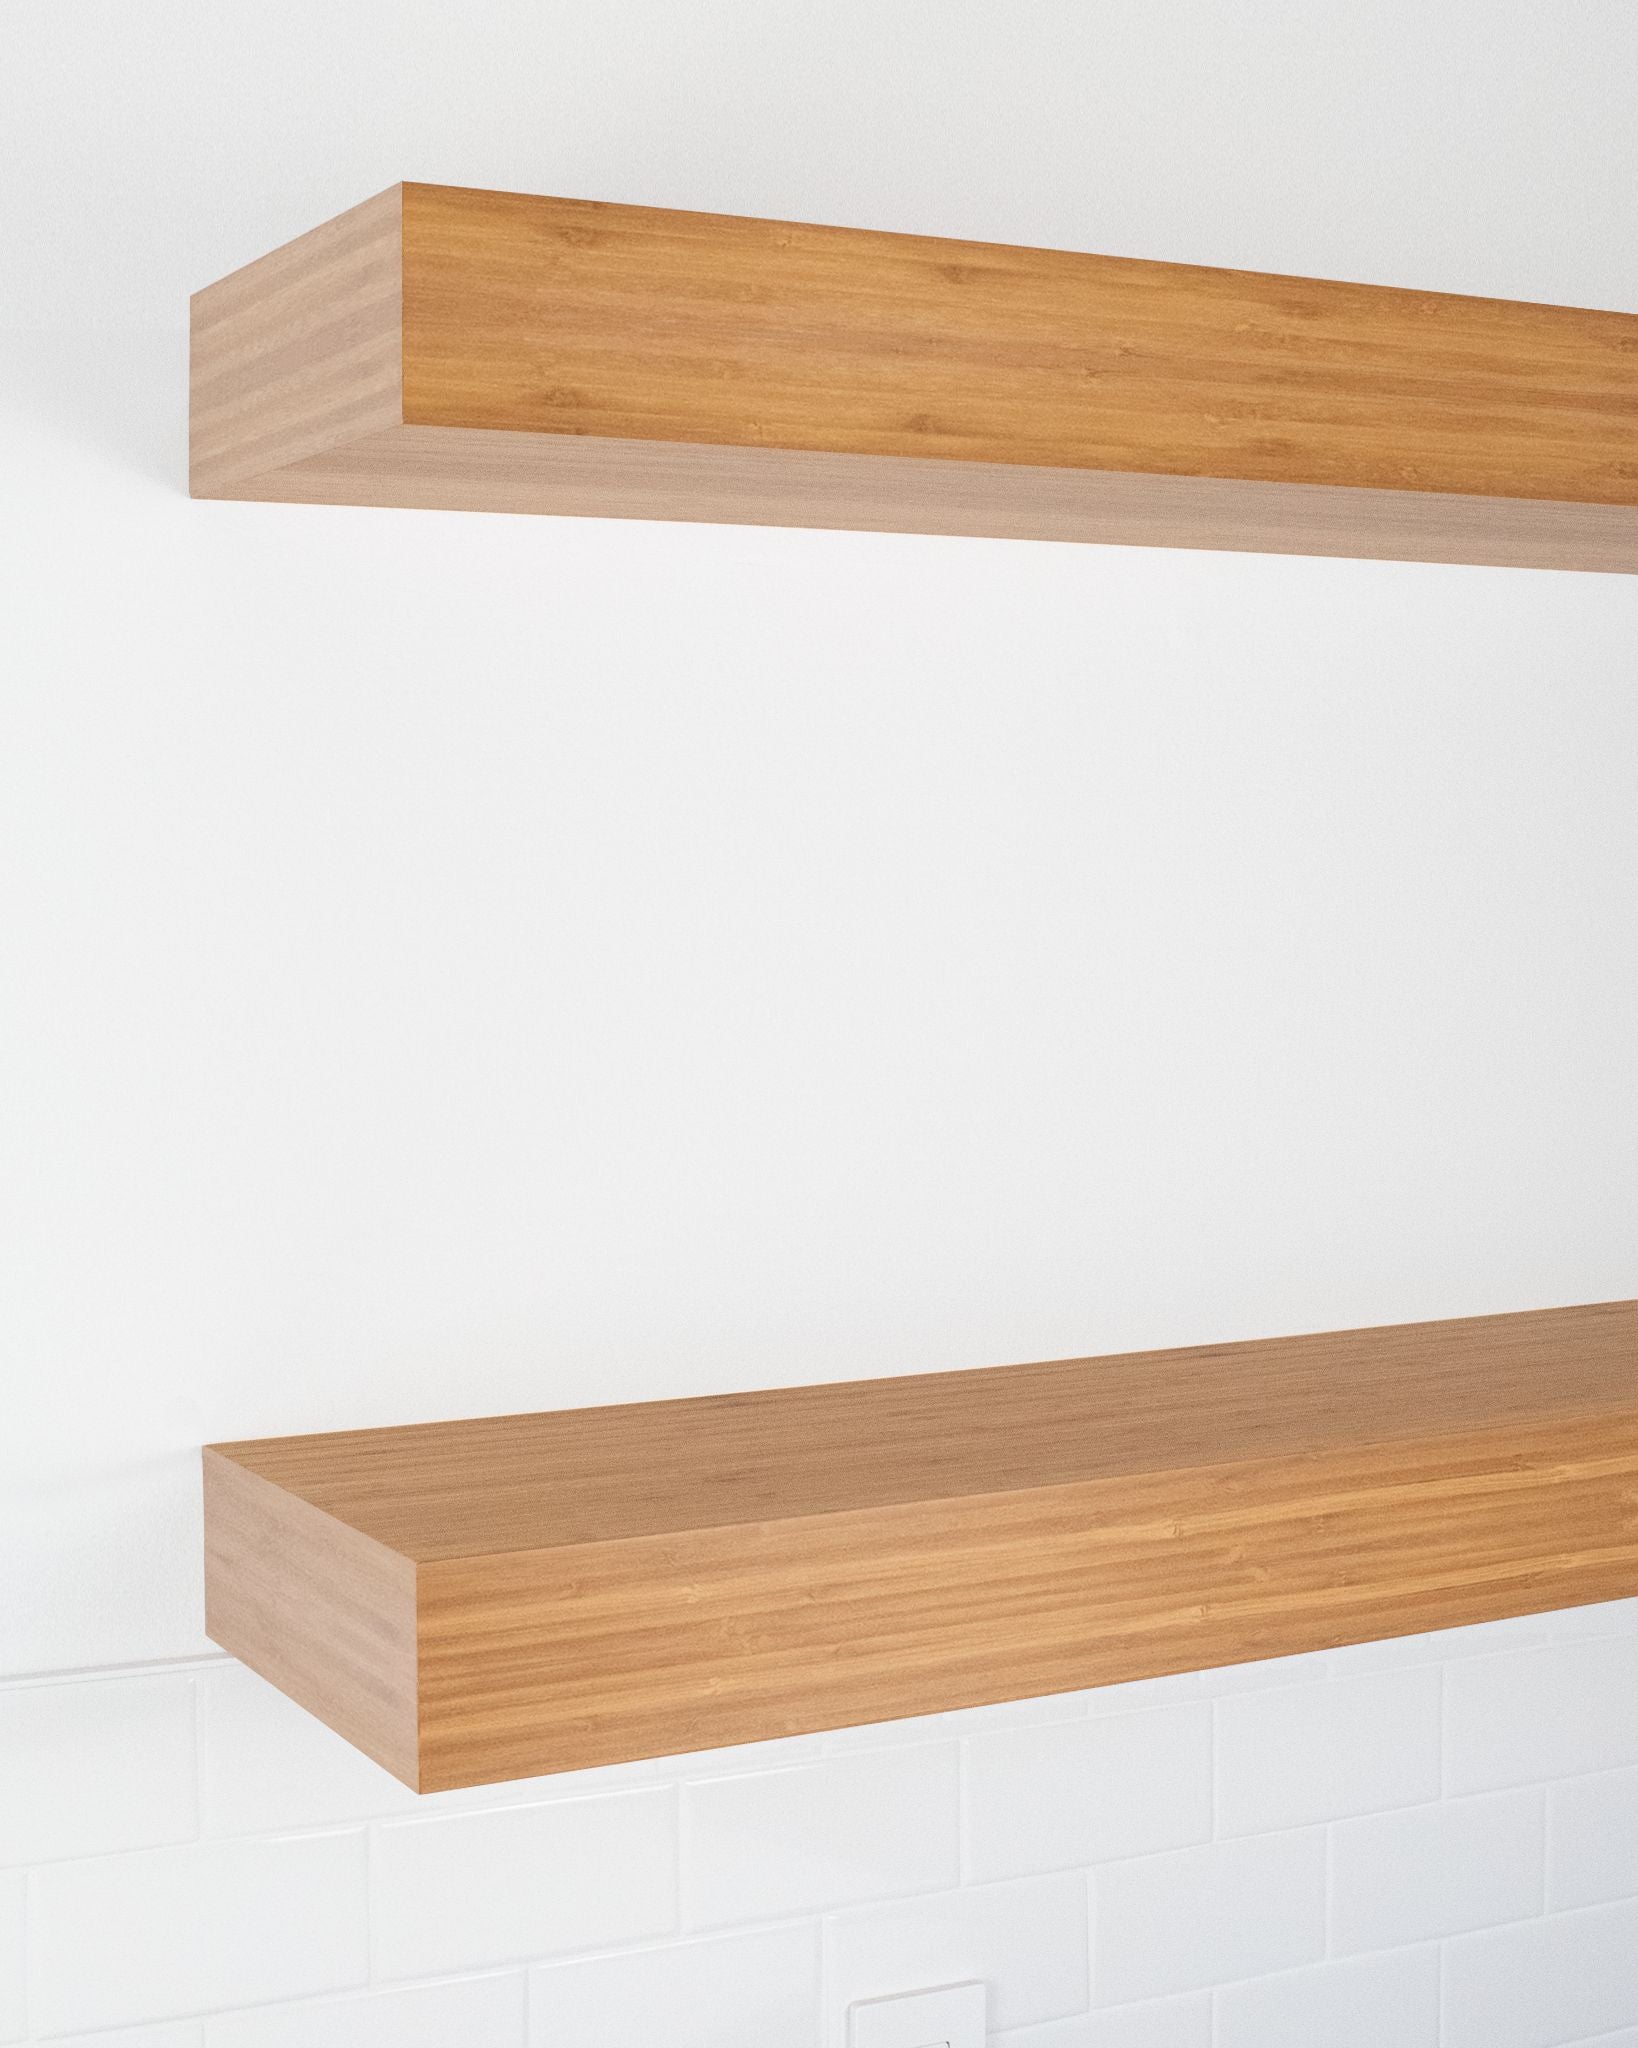 Bamboo Floating Shelves 2-4" thick